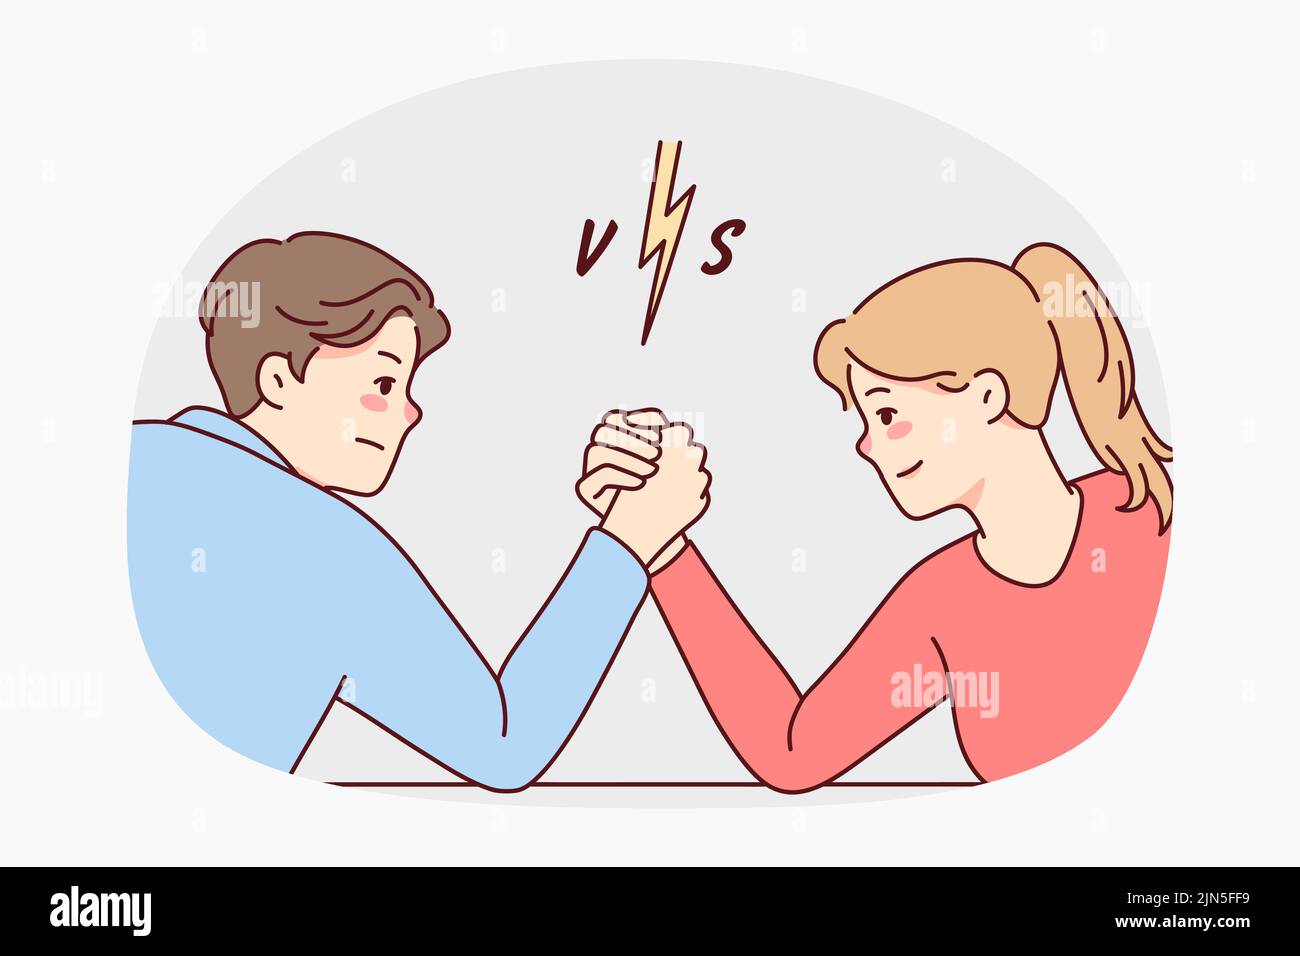 Man and woman arm wrestling decide leadership and dominance. Male and female cartoon characters demonstrate strength and power. Vector illustration.  Stock Vector